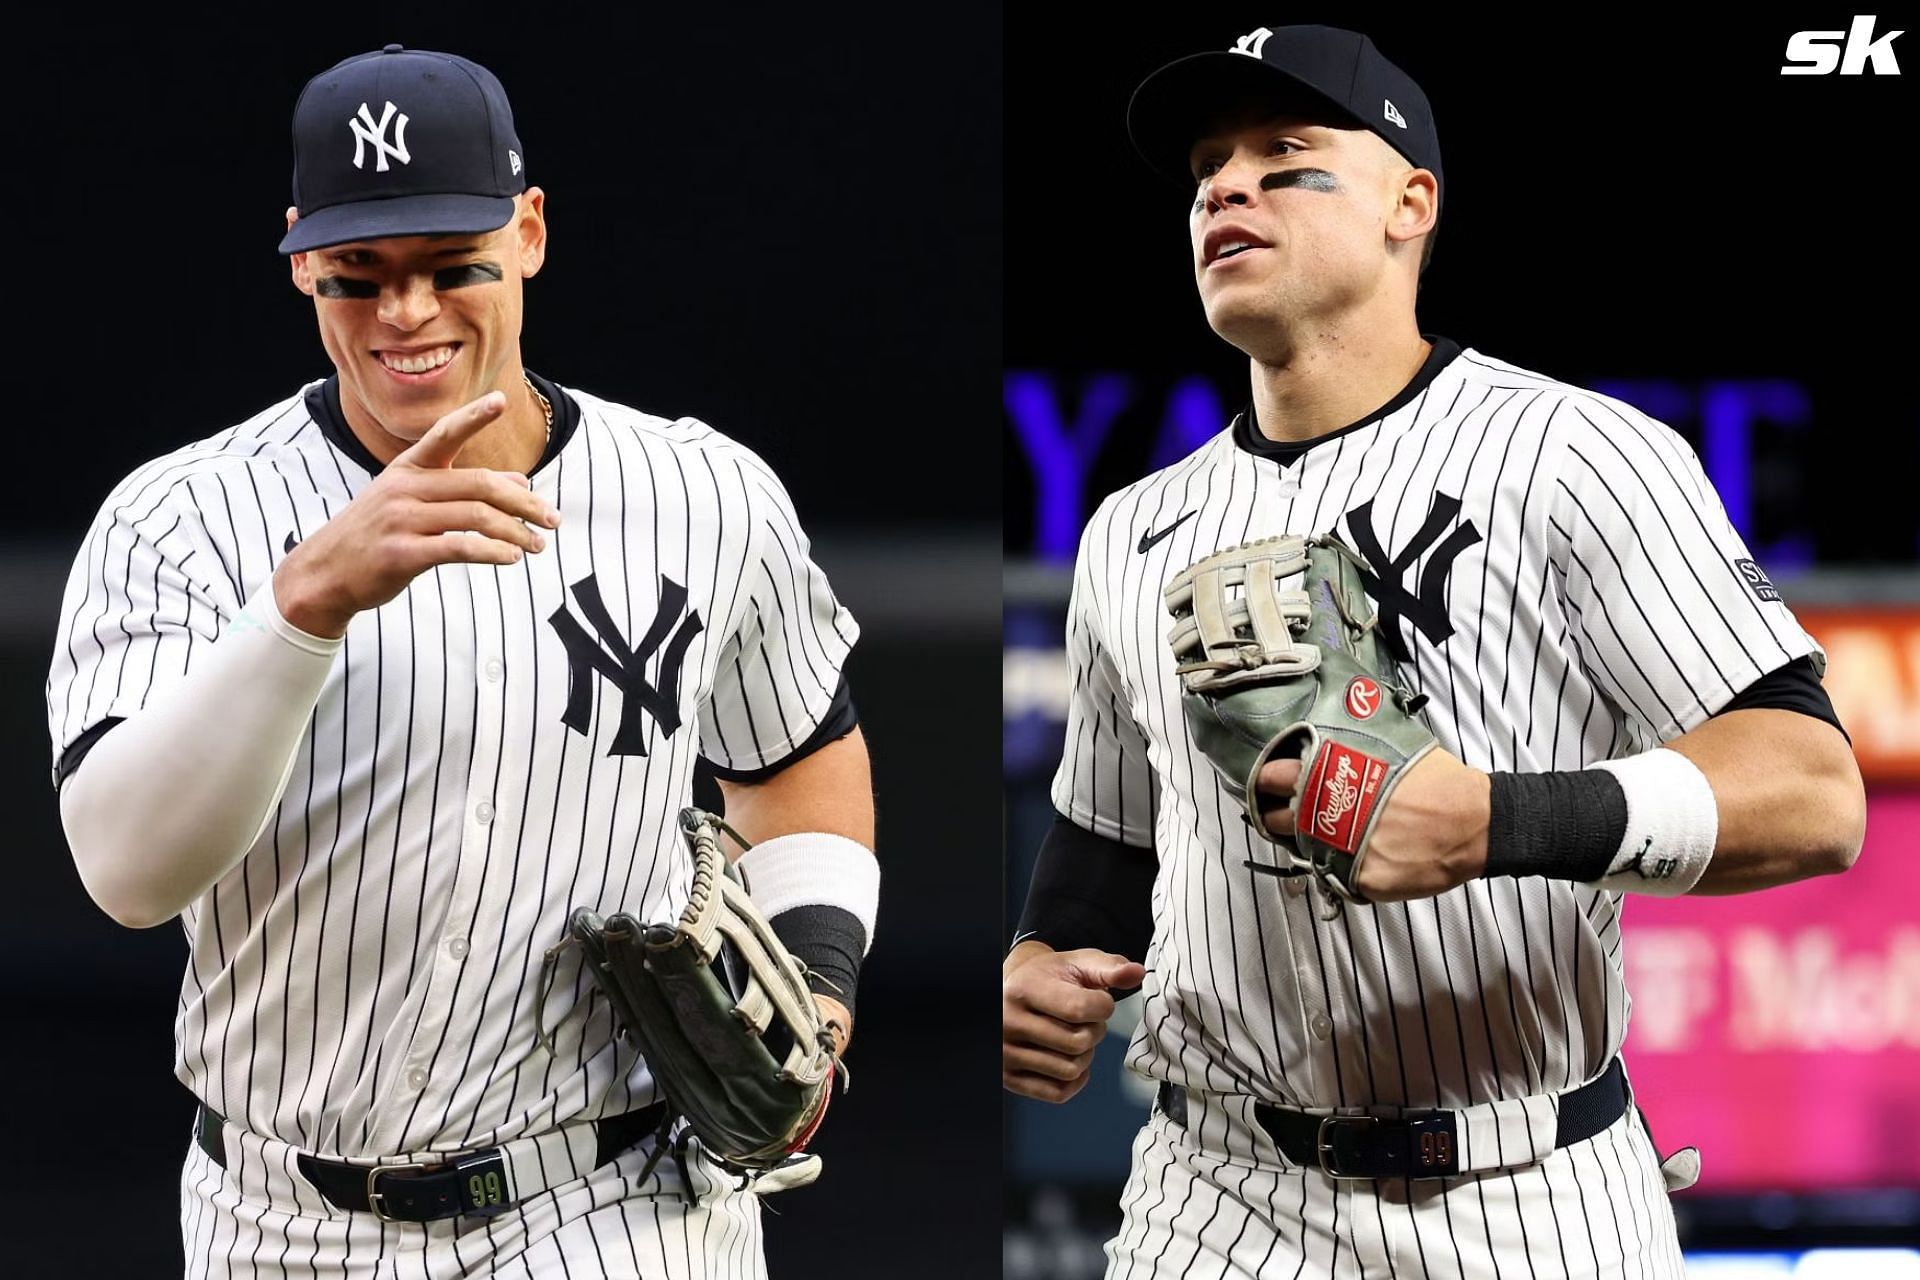 Yankees fans disappointed with Aaron Judge